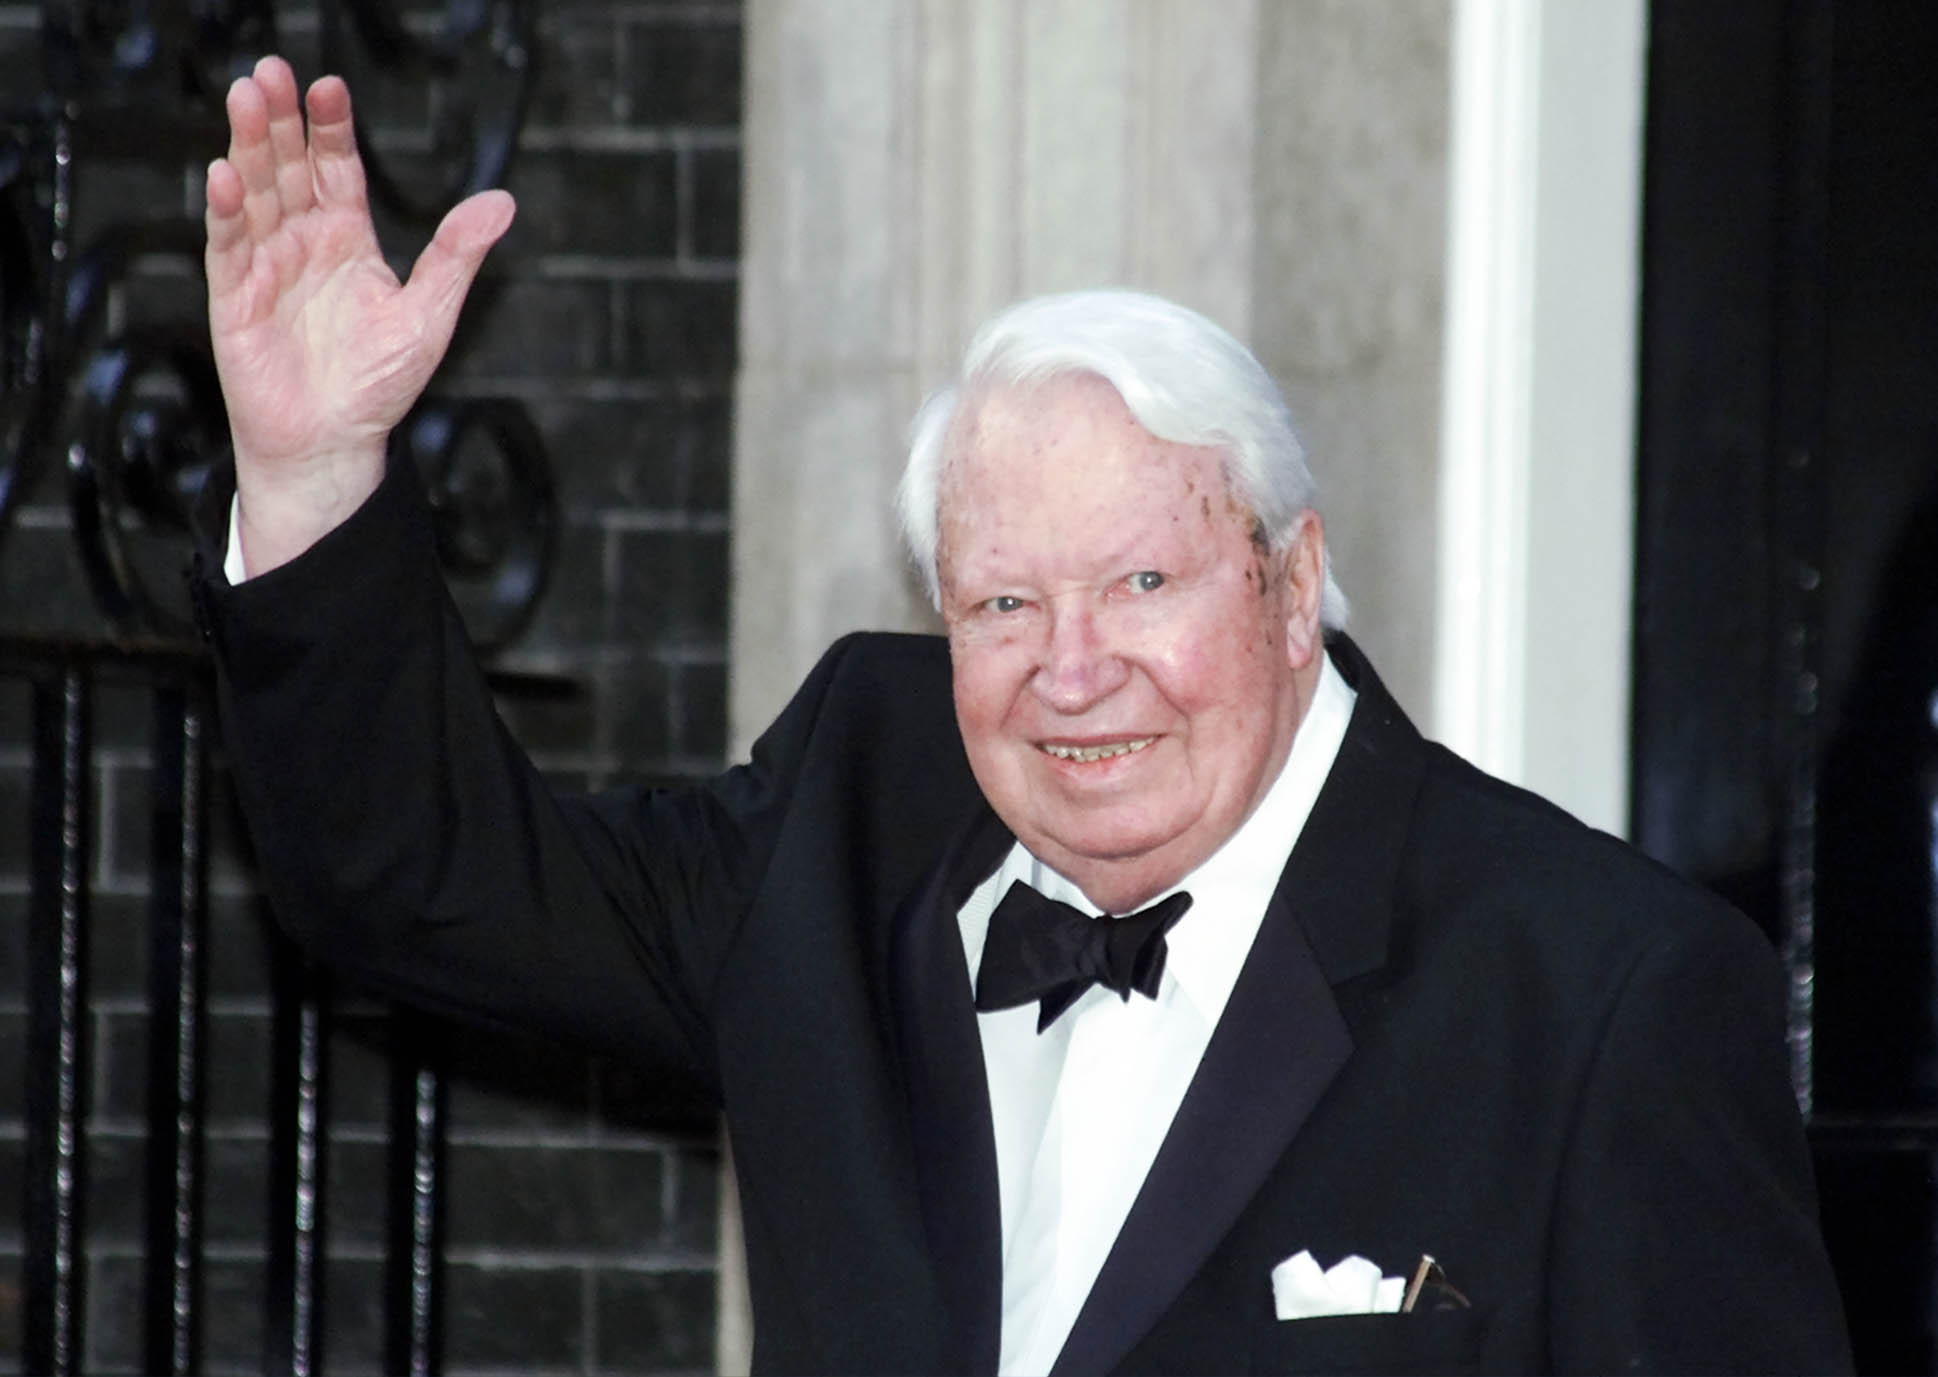 Britain's former Prime Minister Sir Edward Heath arrives at 10 Downing Street, in London Monday, April 29, 2002, where Prime Minister Tony Blair was hosting a celebratory royal Golden Jubilee dinner. Britain's Queen Elizabeth II, the Duke of Edinburgh and four former Prime Ministers were attending along with the relatives of five other prime ministers who held power during the Queen's 50-year reign but have since died. (AP Photo/Max Nash)